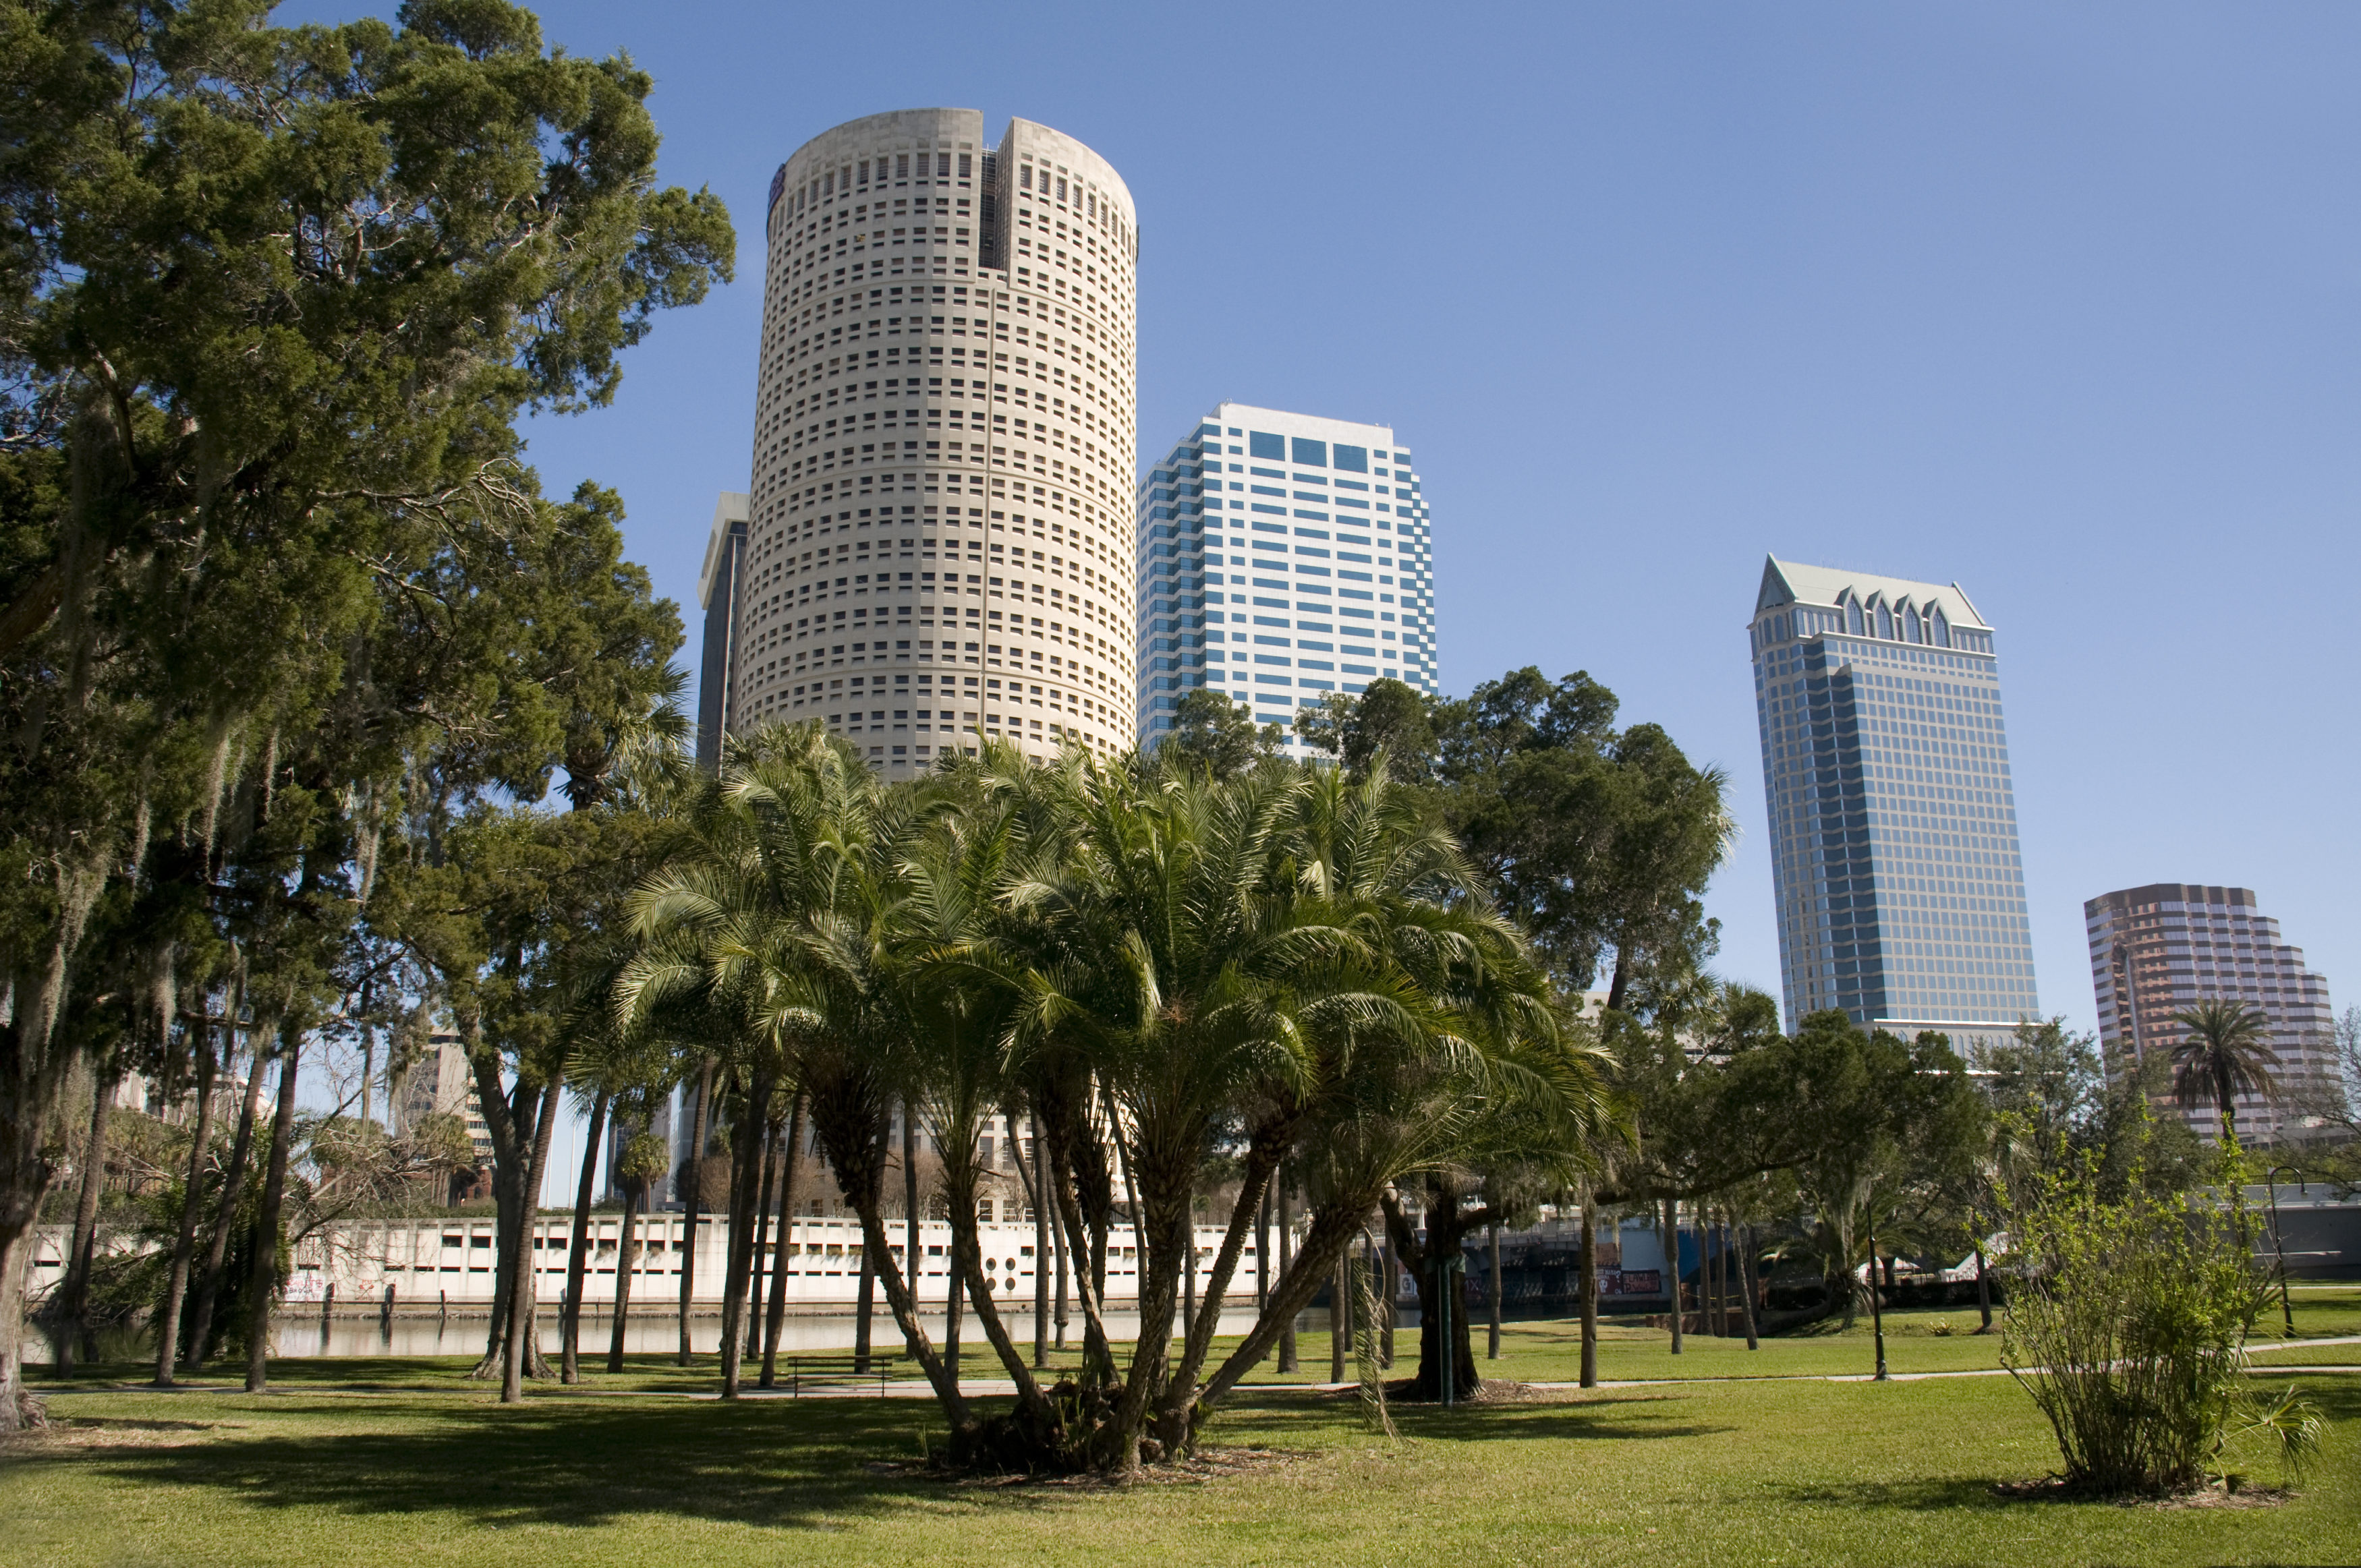 Park in Downtown Tampa Bay, Florida